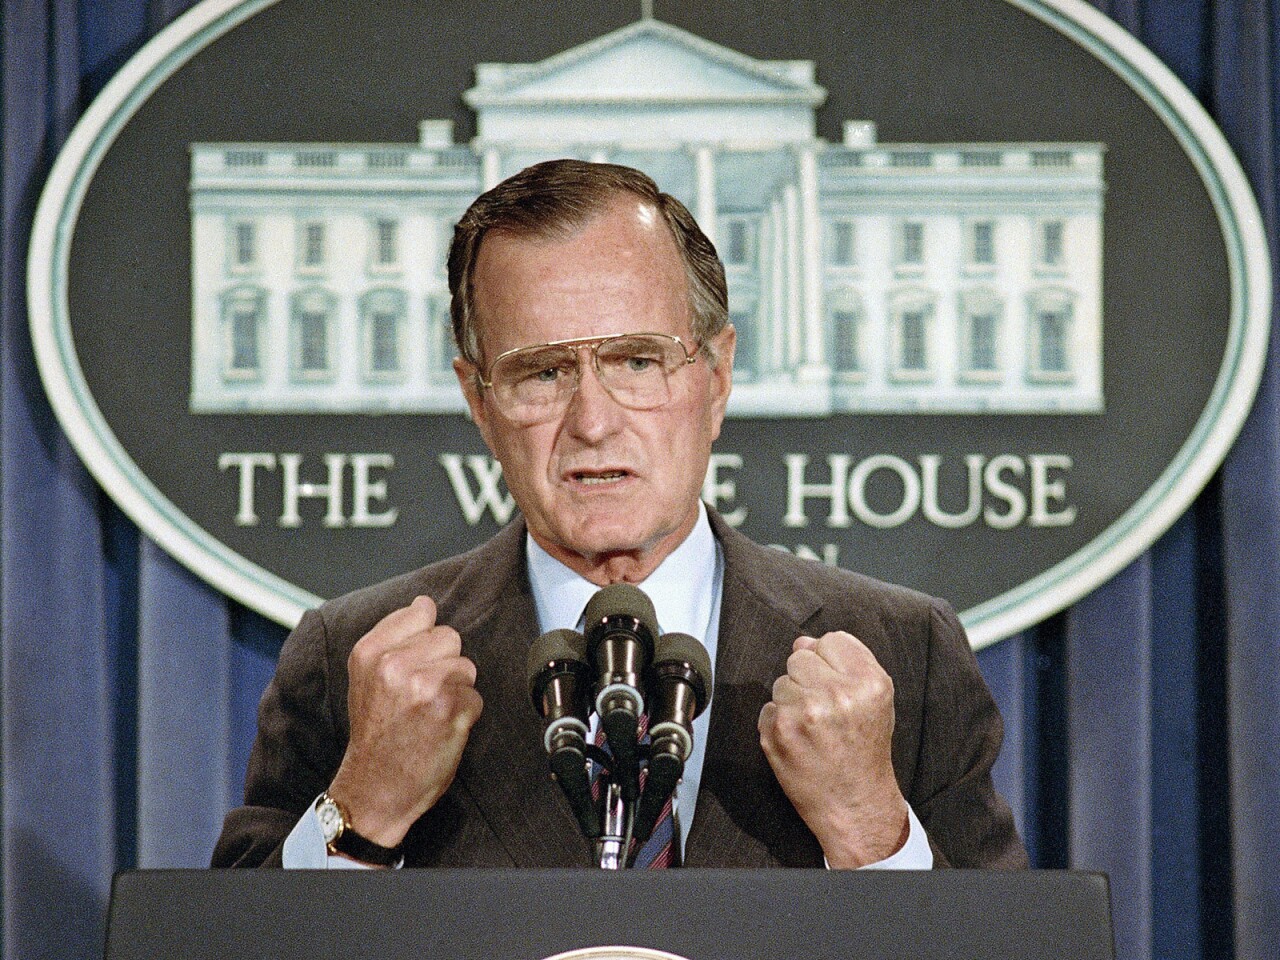 During George H.W. Bush's single term as president, the Berlin Wall fell and the Soviet Union collapsed. In 1991, Bush formed a U.S.-led coalition that drove the Iraqi army out of Kuwait, the U.S. military's most successful offensive since World War II. But dissent within the GOP and economic woes hobbled his bid for reelection in 1992, and he lost to Bill Clinton.